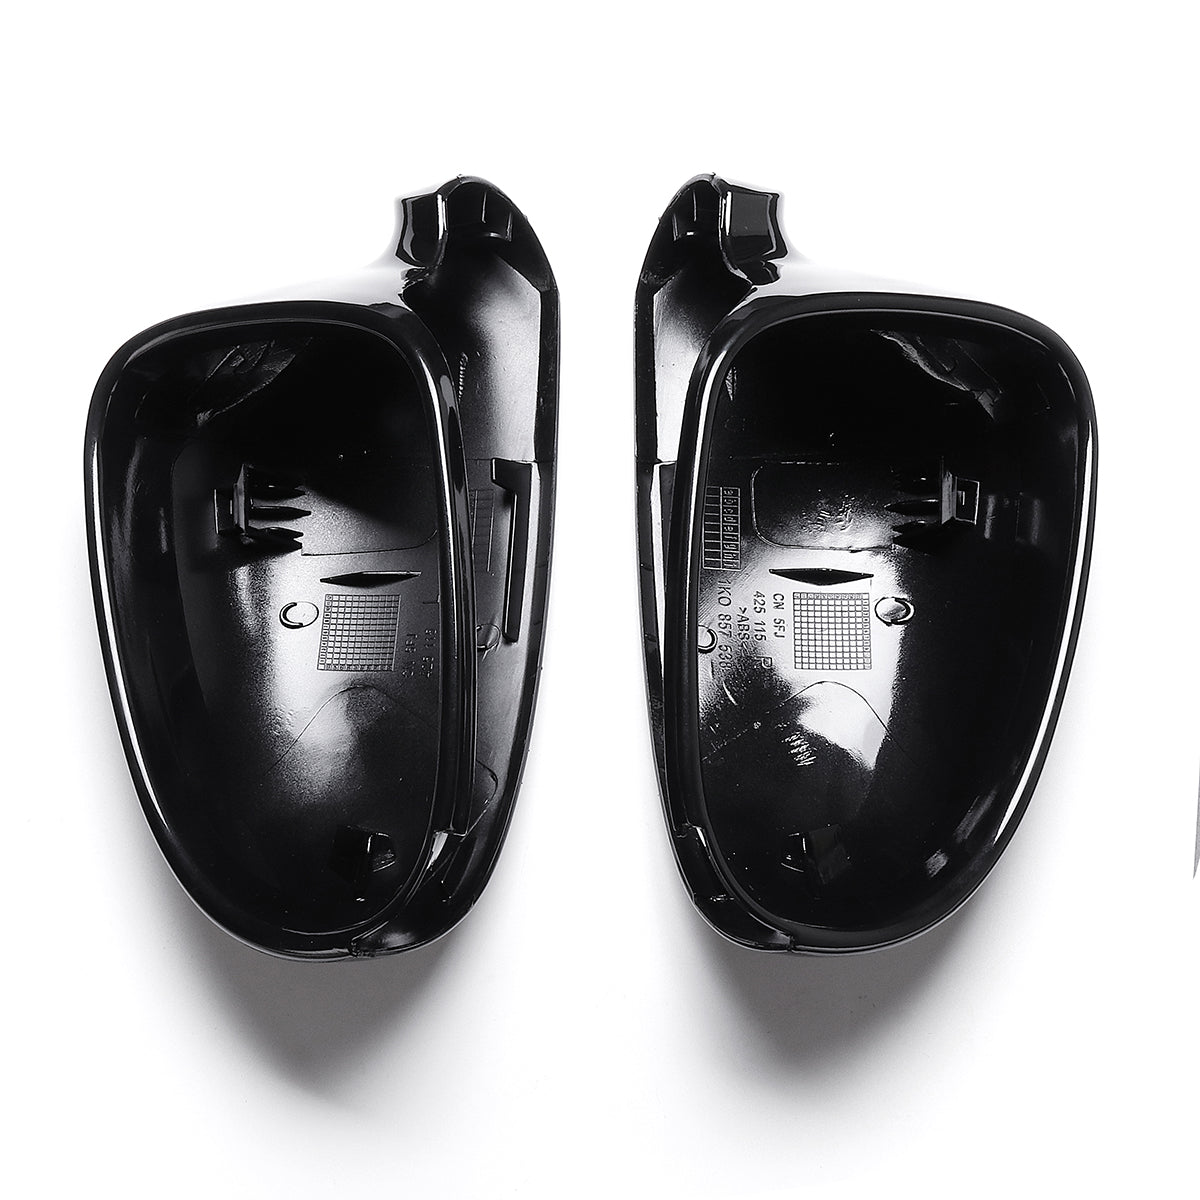 Pair Car Front Wing Side Mirror Cover Housing Black Cap For VW Jetta Golf MK5 Eos for SKODA for SEAT - Auto GoShop